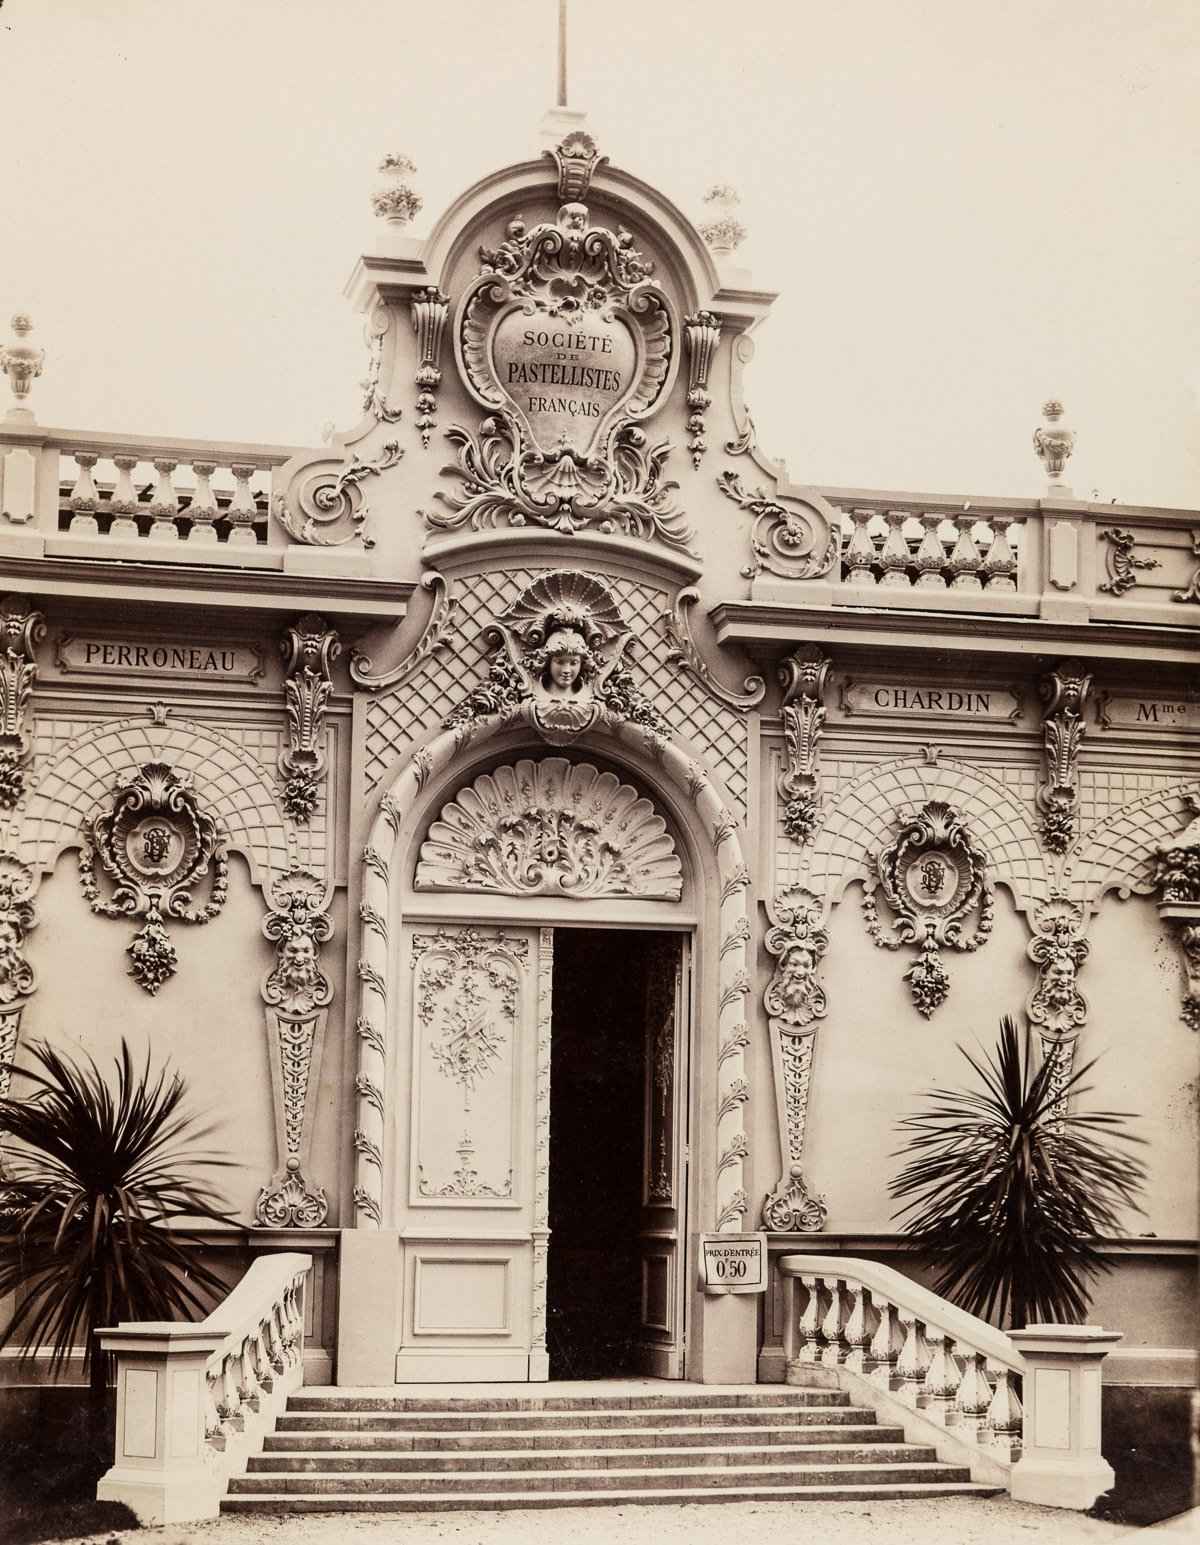 The entrance to an exhibition of French pastellists